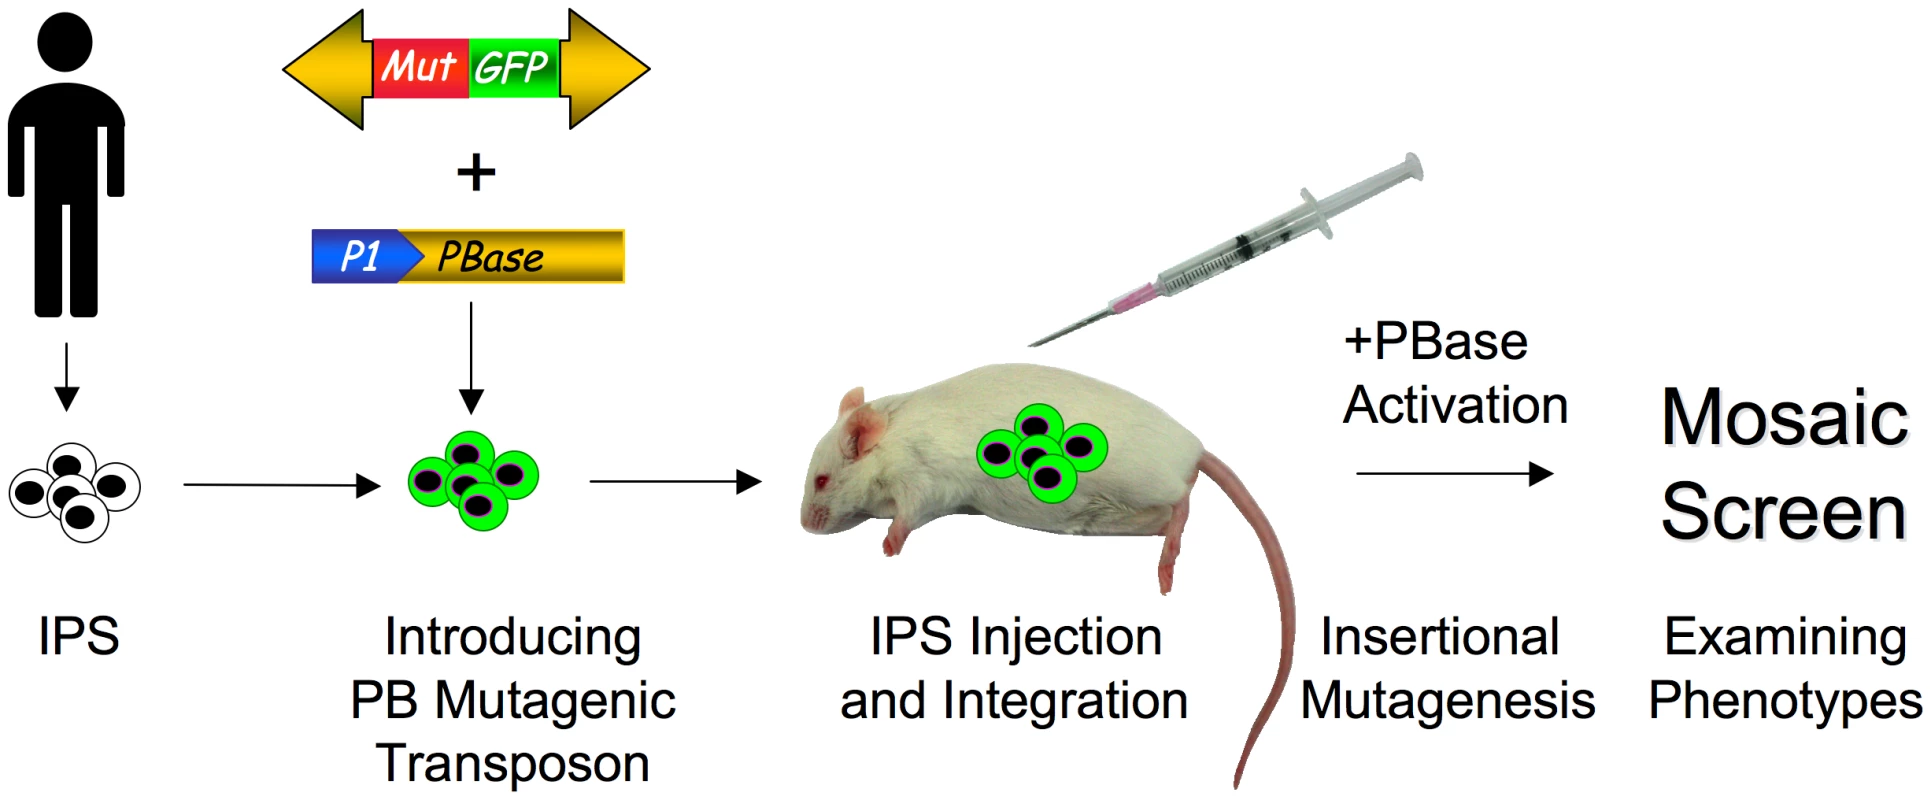 Screening for phenotypes in humanized mice with patient-derived IPS cells.